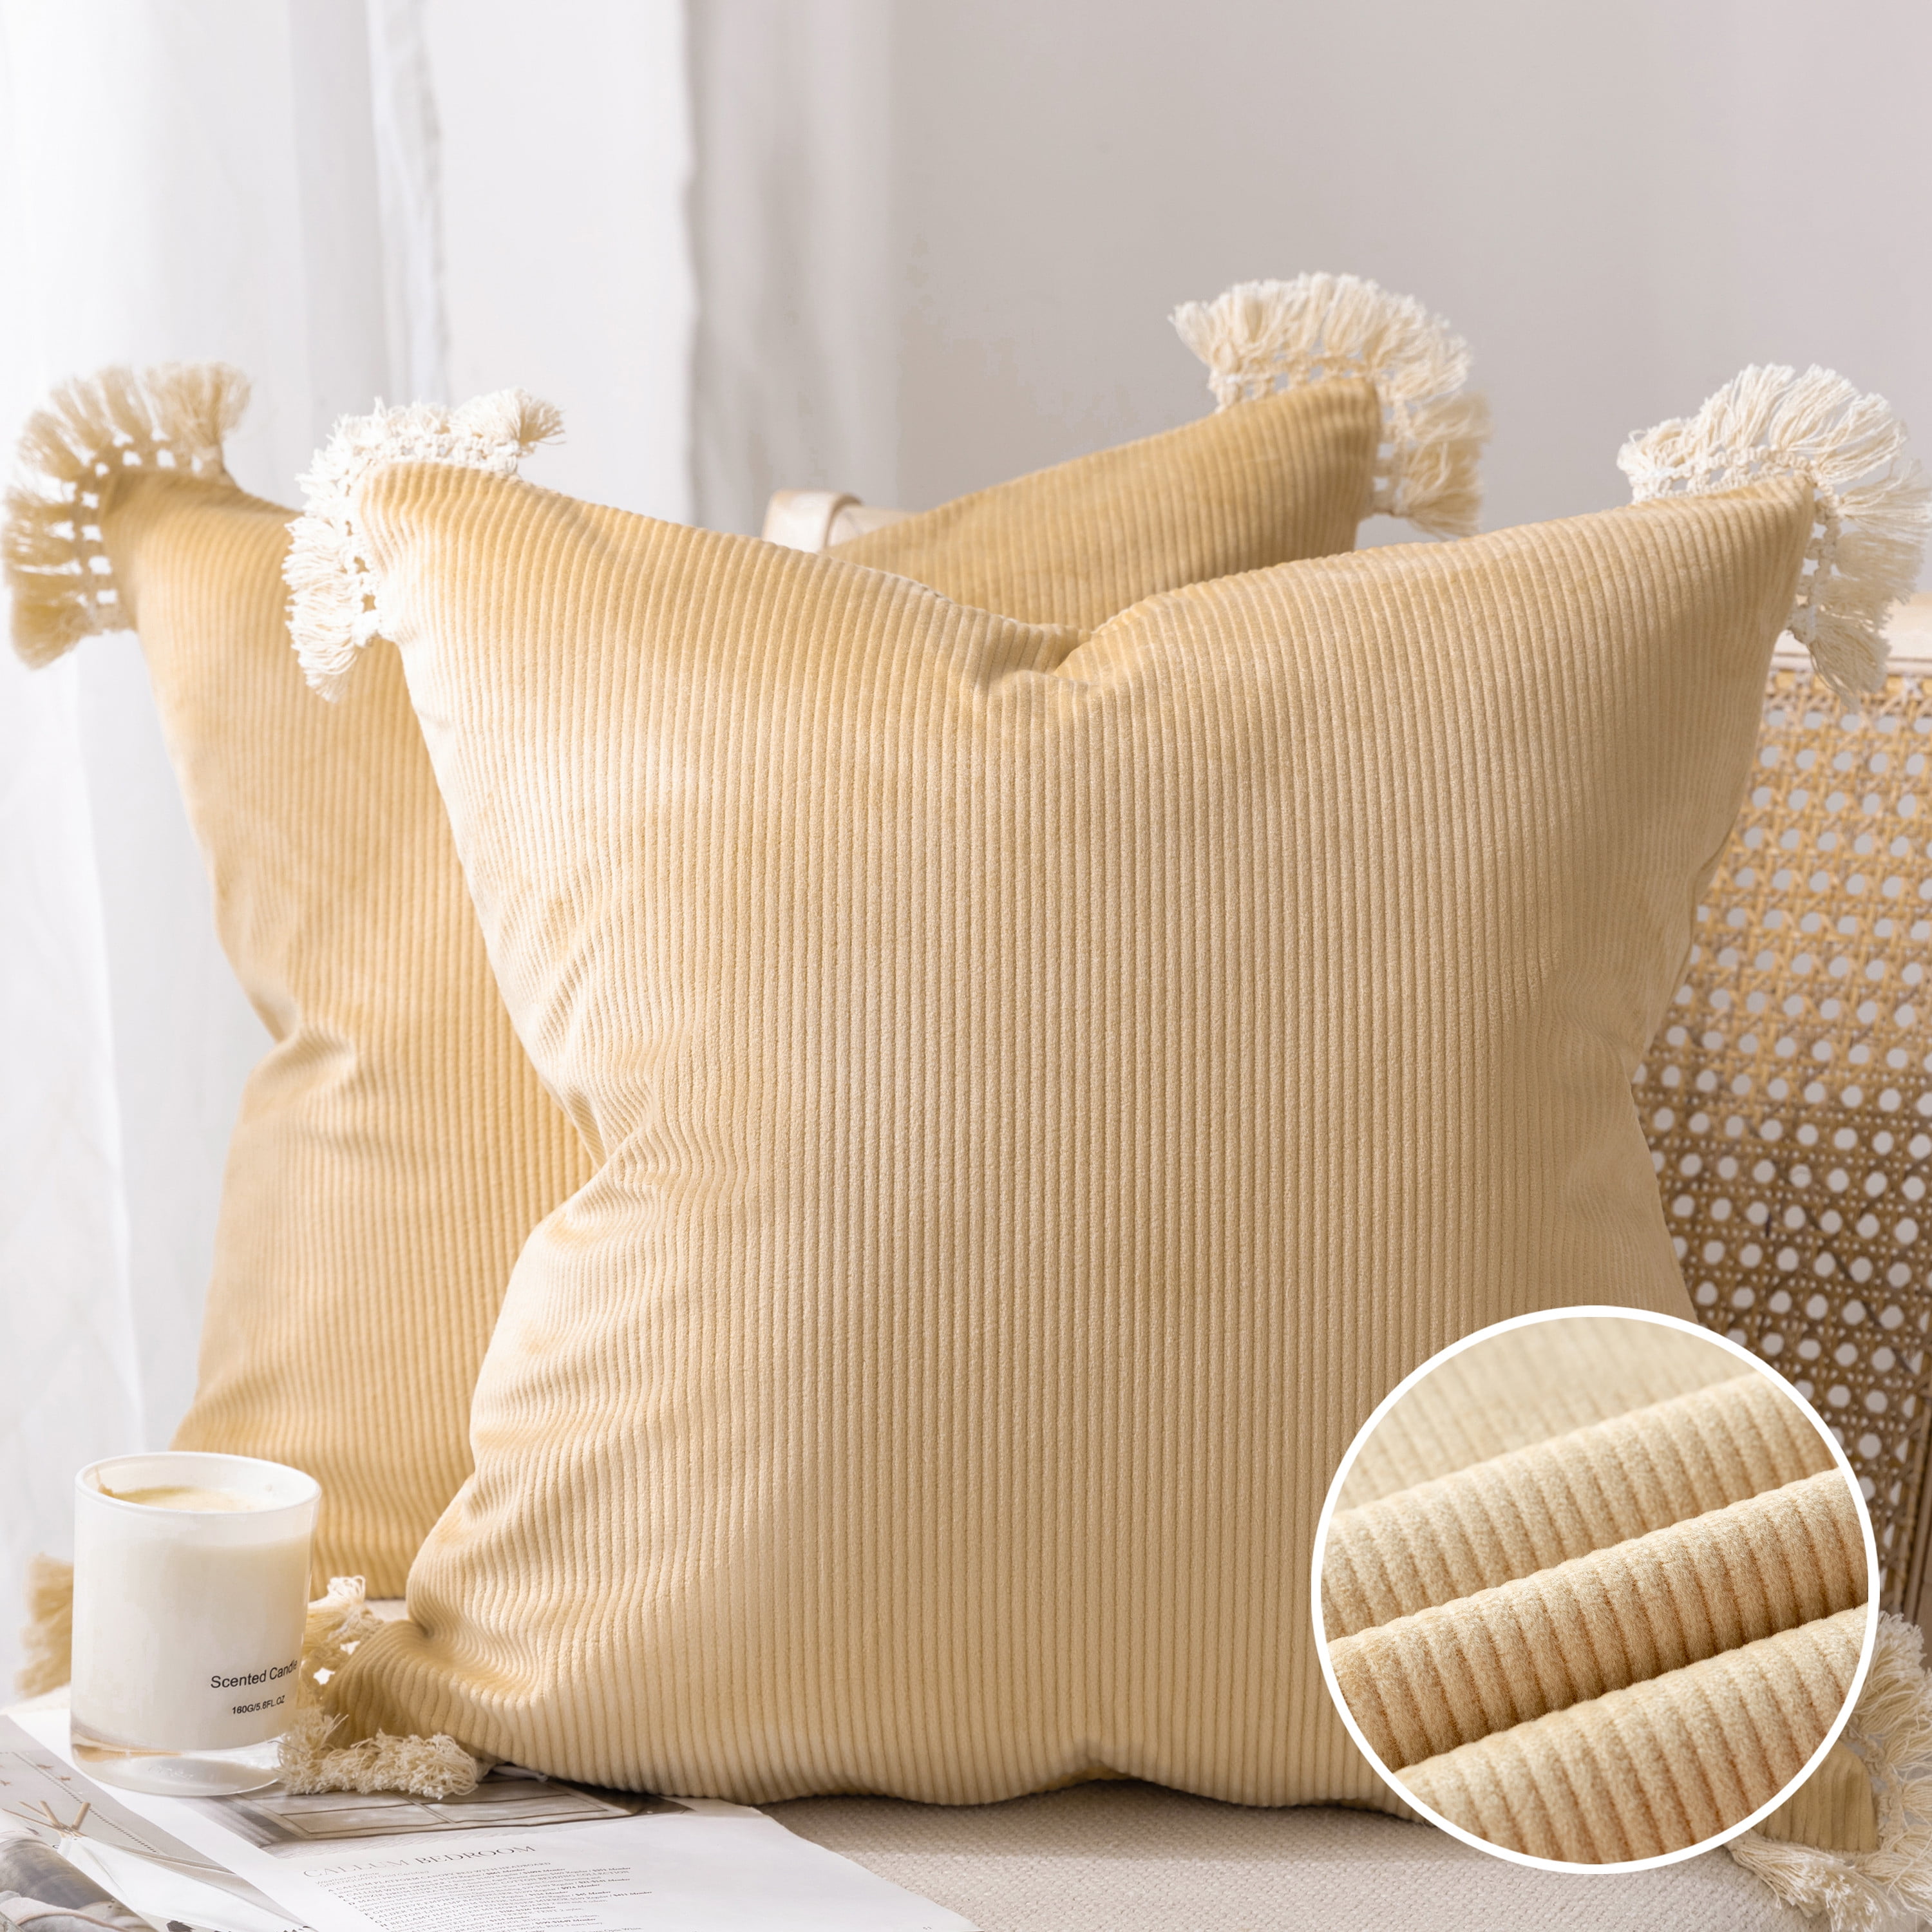 Phantoscope Boho Woven Tufted with Tassel Series Decorative Throw Pillow Cover, 12 inch x 20 inch, Cream White Stripe, 1 Pack